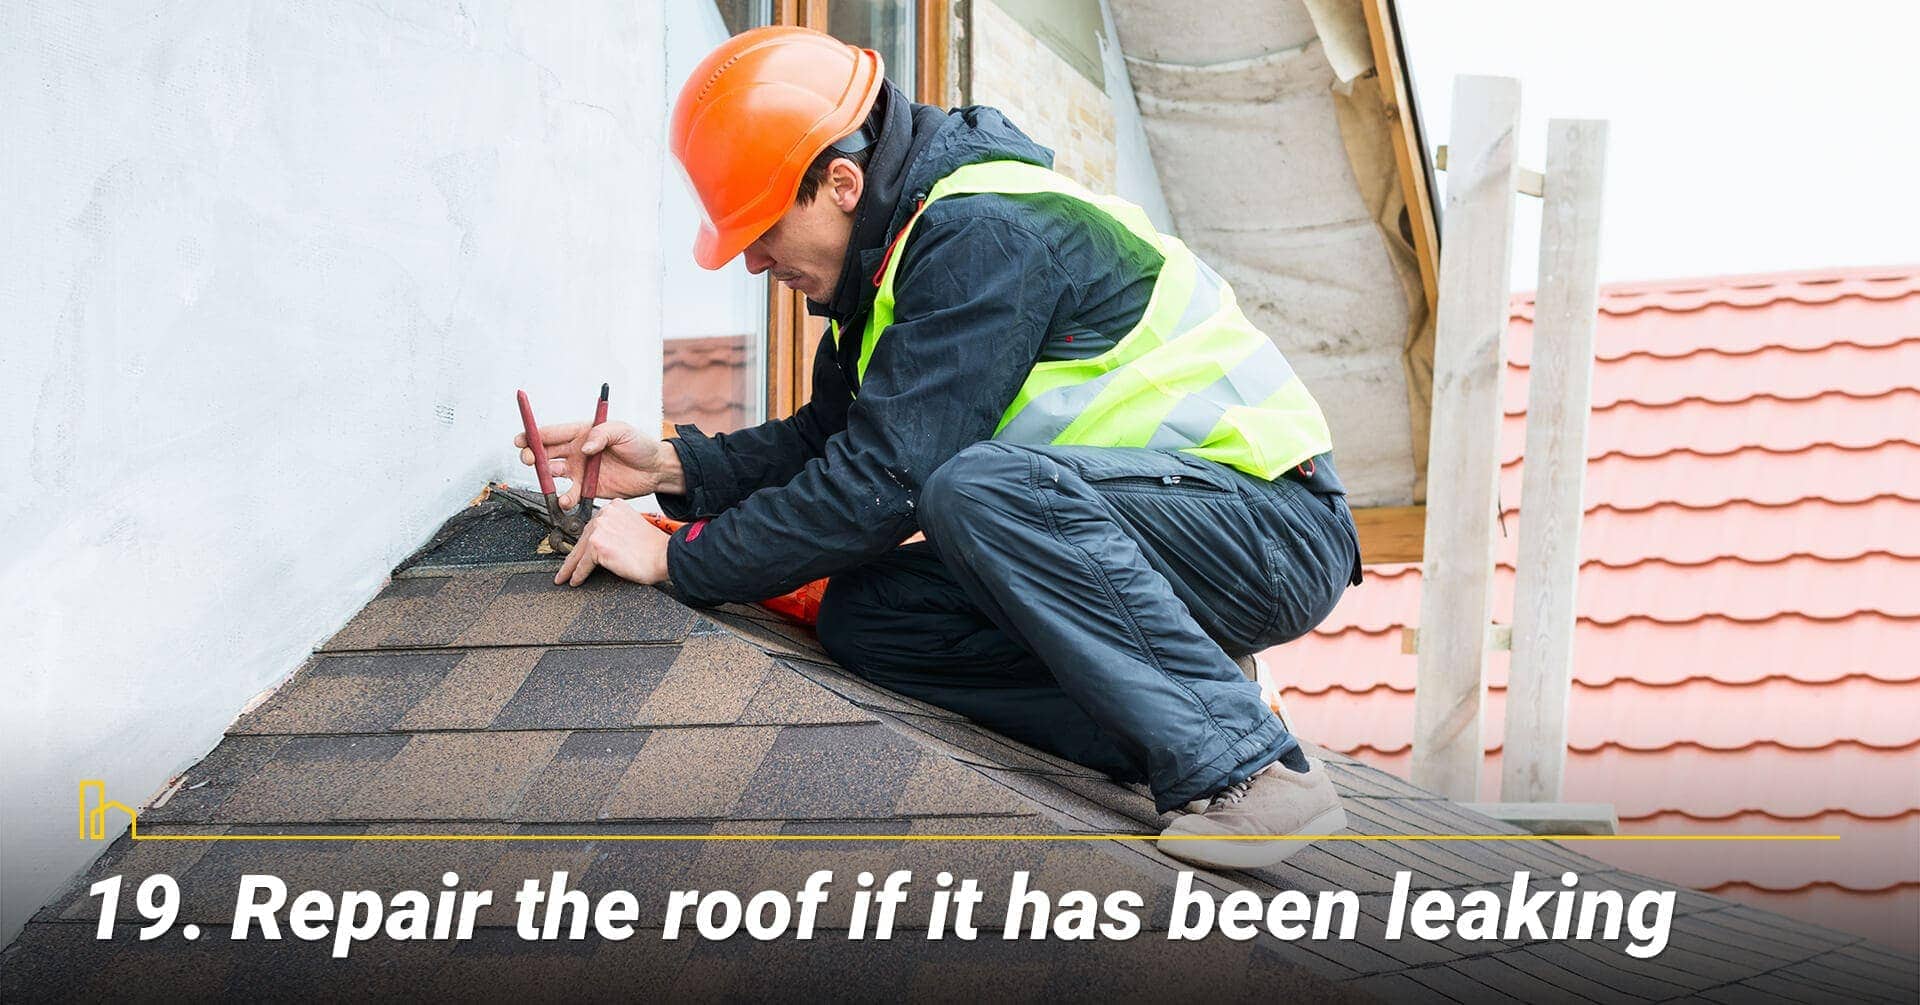 Repair the roof if it has been leaking